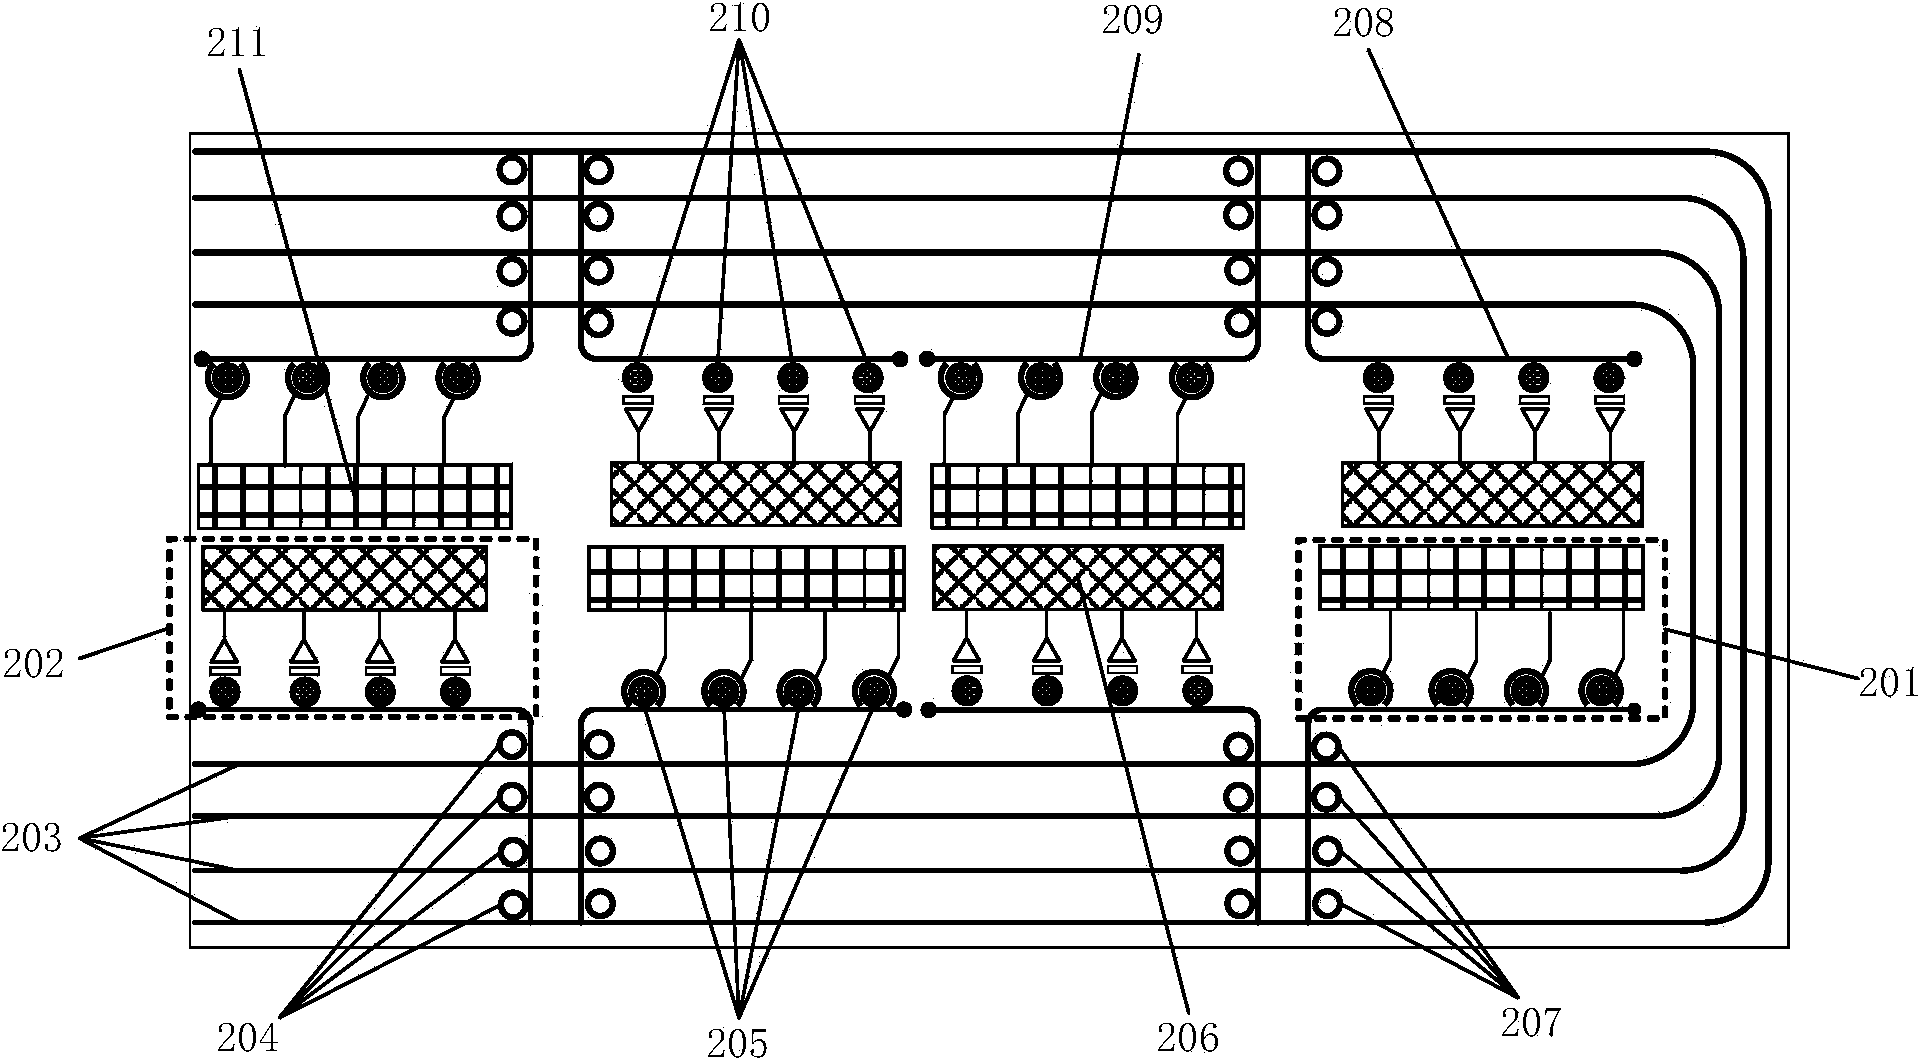 Parallel access memory system based on optical interconnection